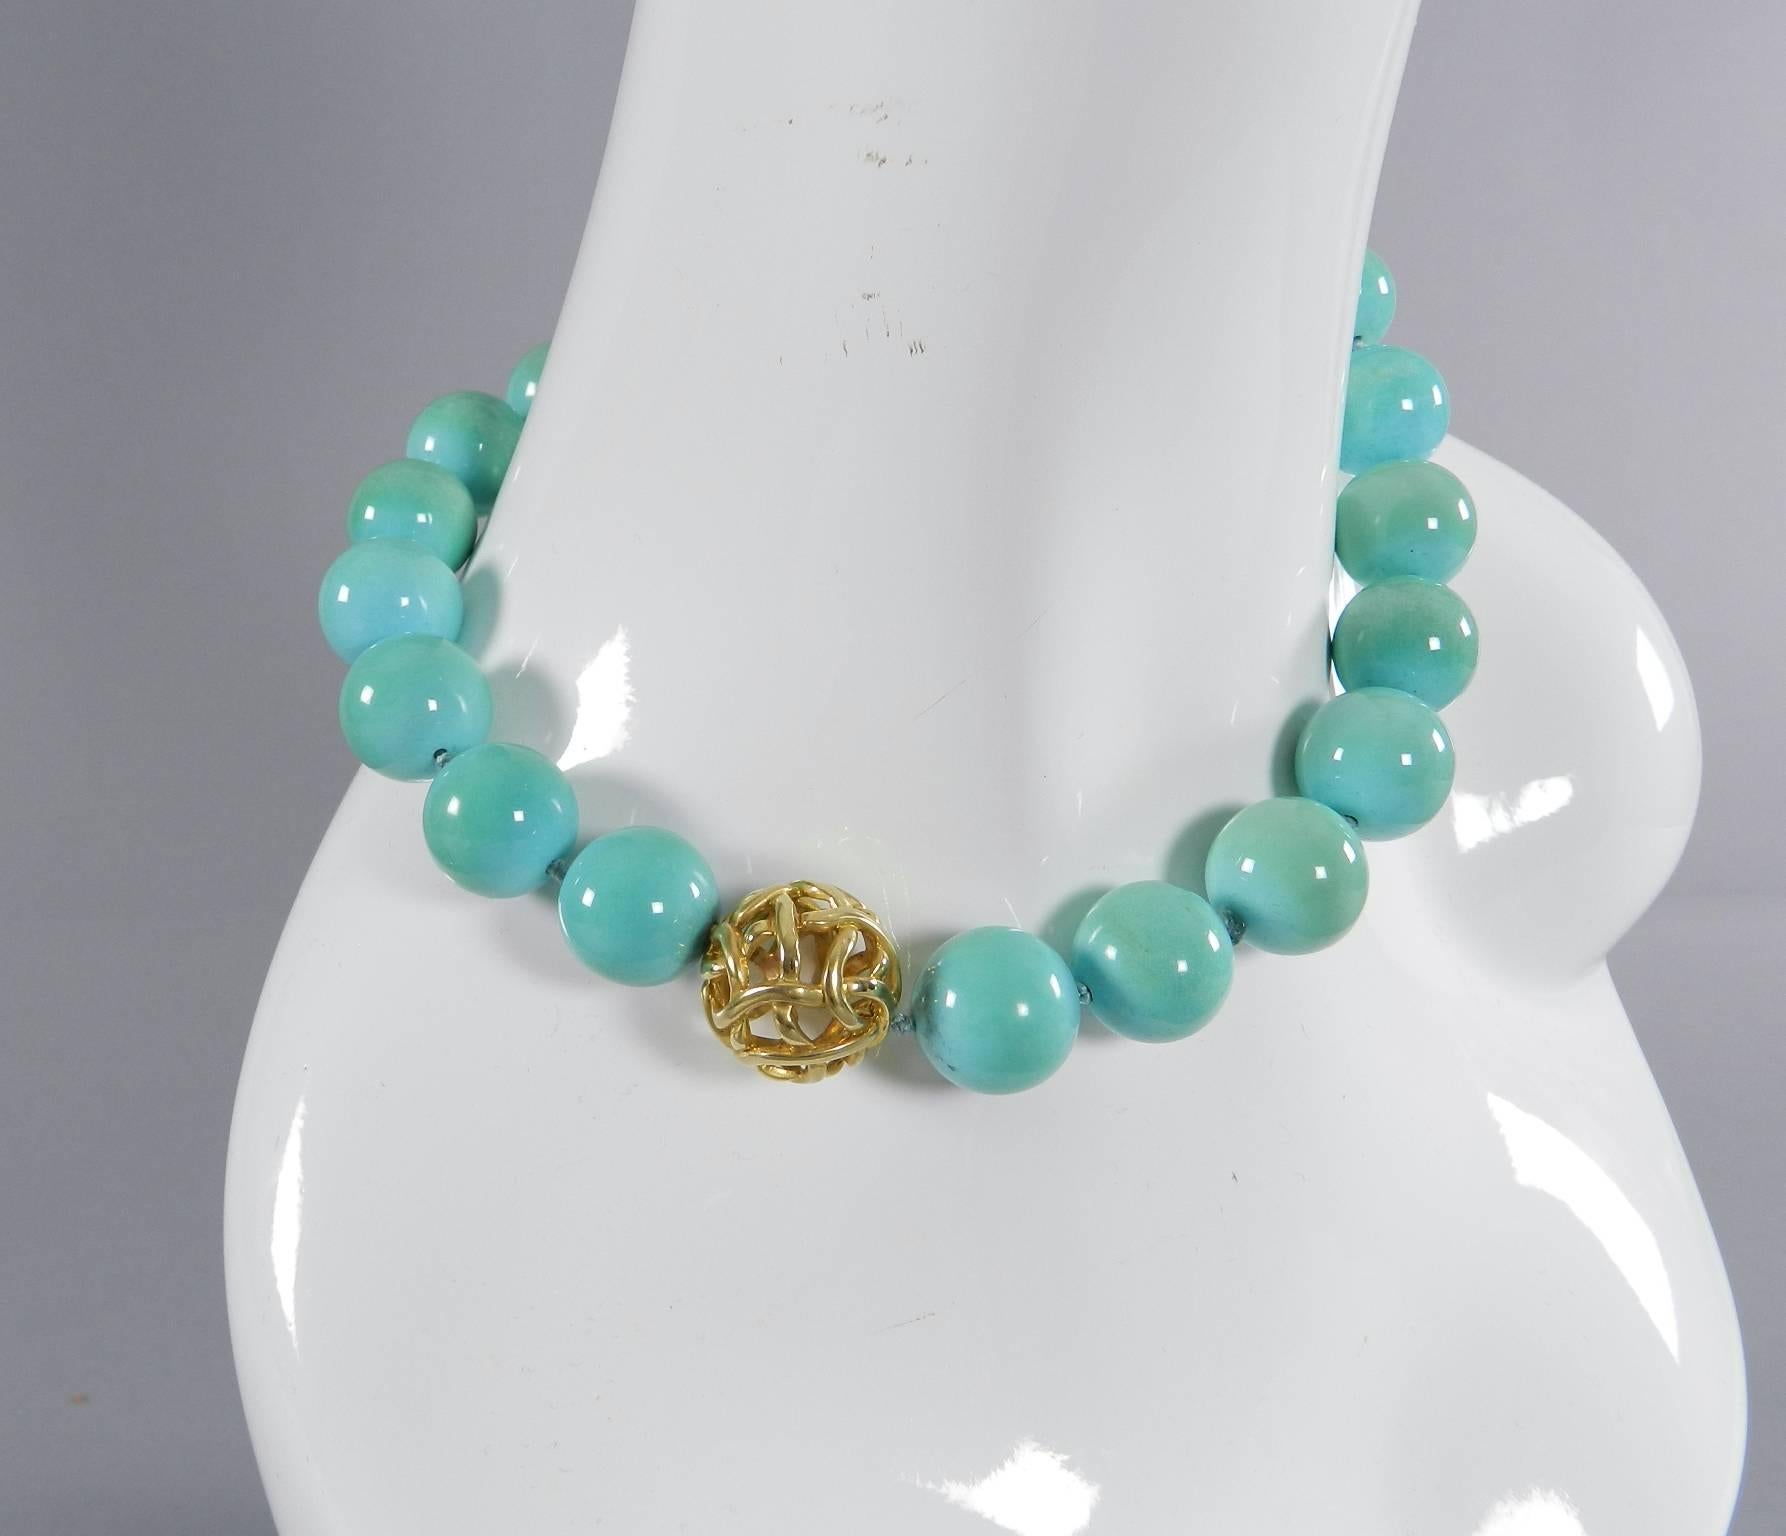 Angela Cummings turquoise bead necklace with 18k yellow gold clasp.  21greenish blue turquoise beads that measures 17mm. Caged ball clasp measures 22mm. Measures 17.25